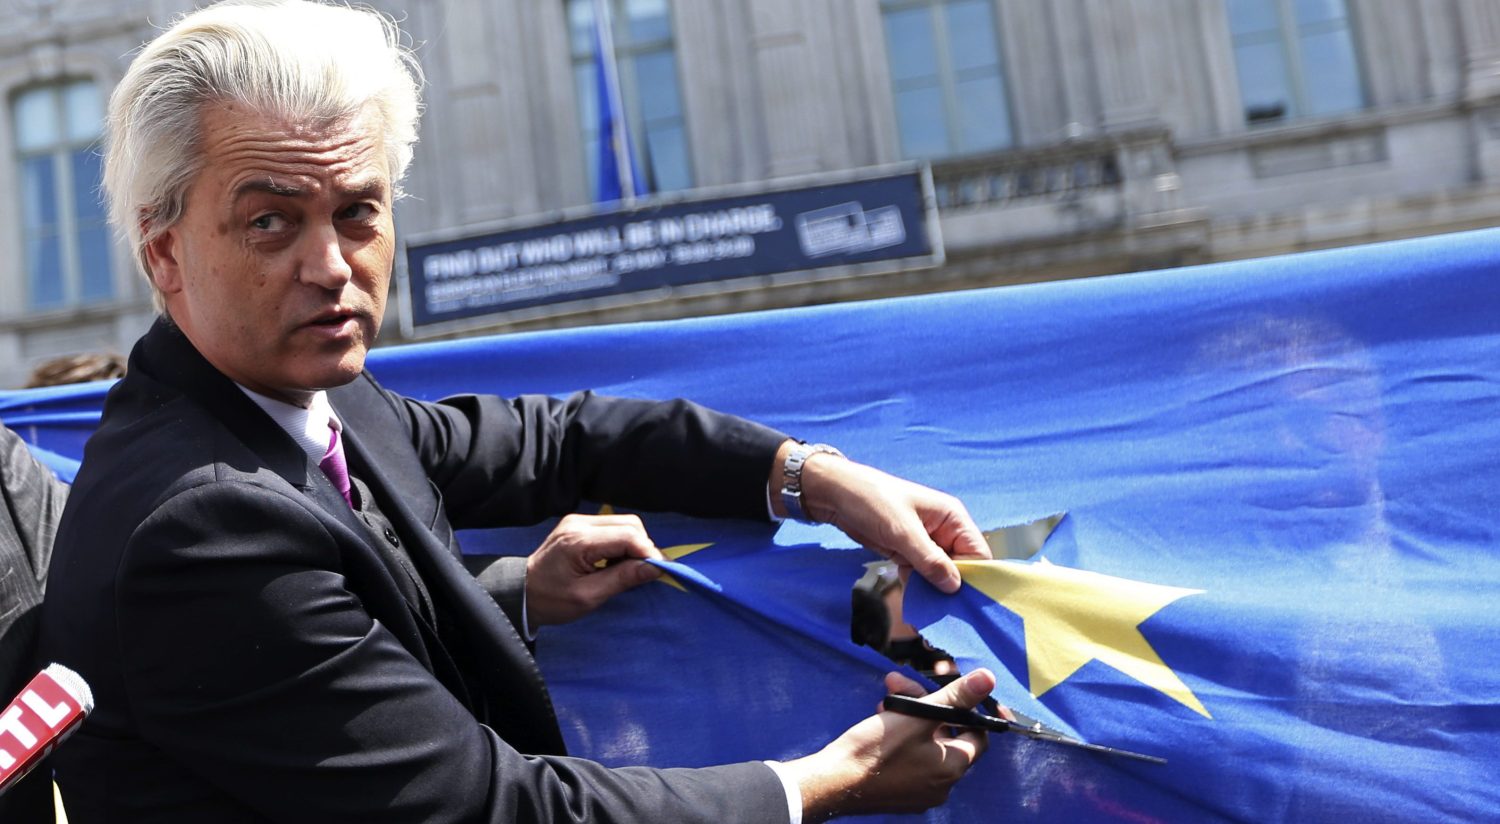 Dutch far-right Freedom Party (PVV) leader Geert Wilders cuts a star from the European Union flag during a demonstration in front of the EU Parliament in Brussels May 20, 2014.